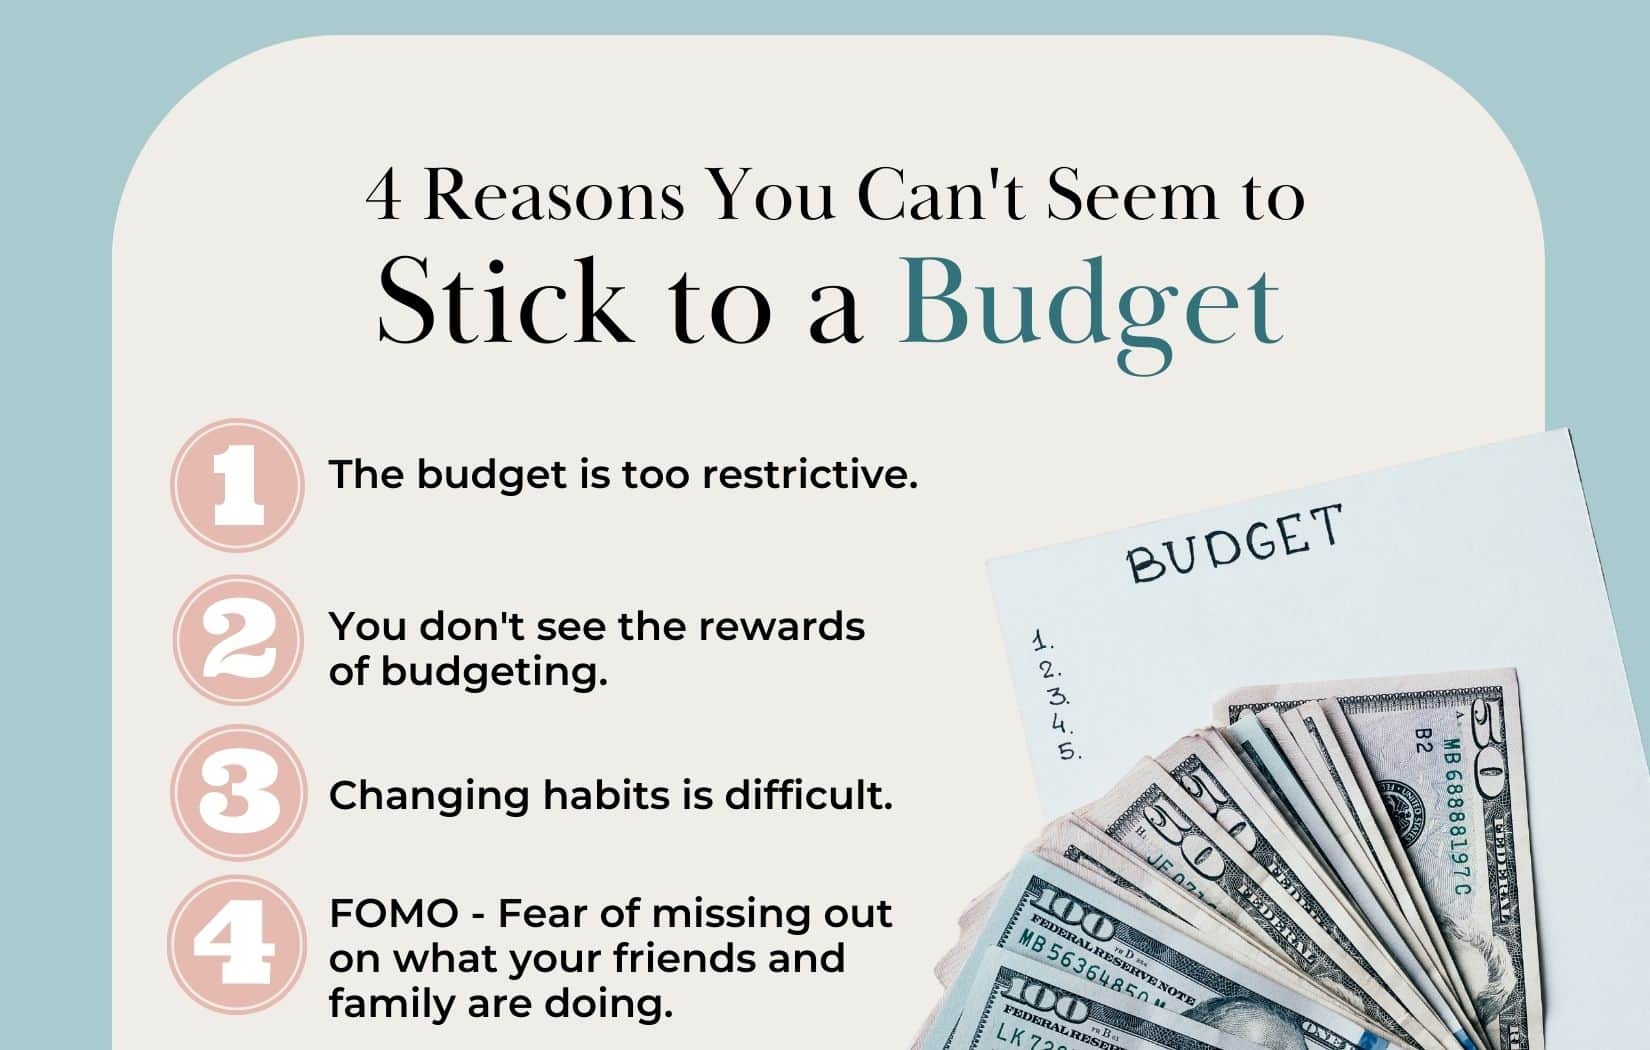 4 reasons you can't seem to stick to a budget